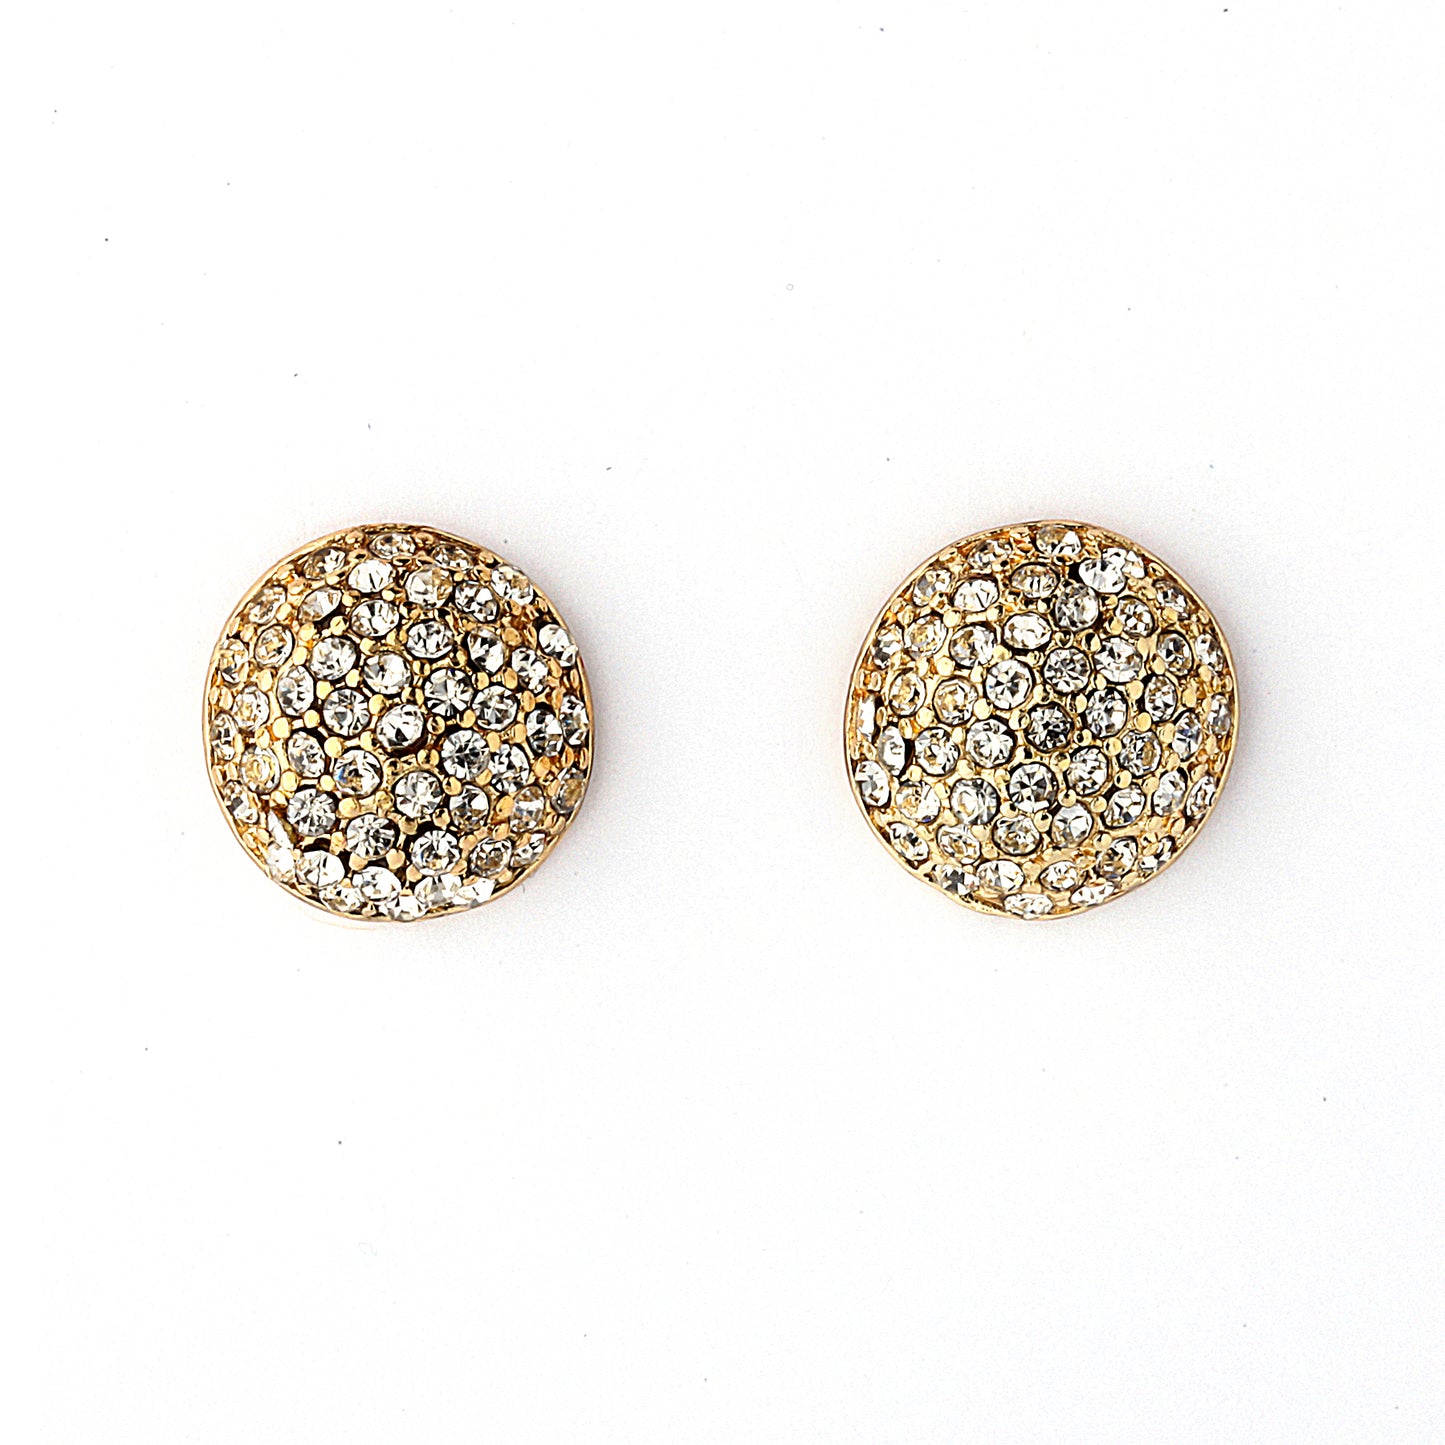 Pave CZ Dome Earrings - 14-kt Gold Filled